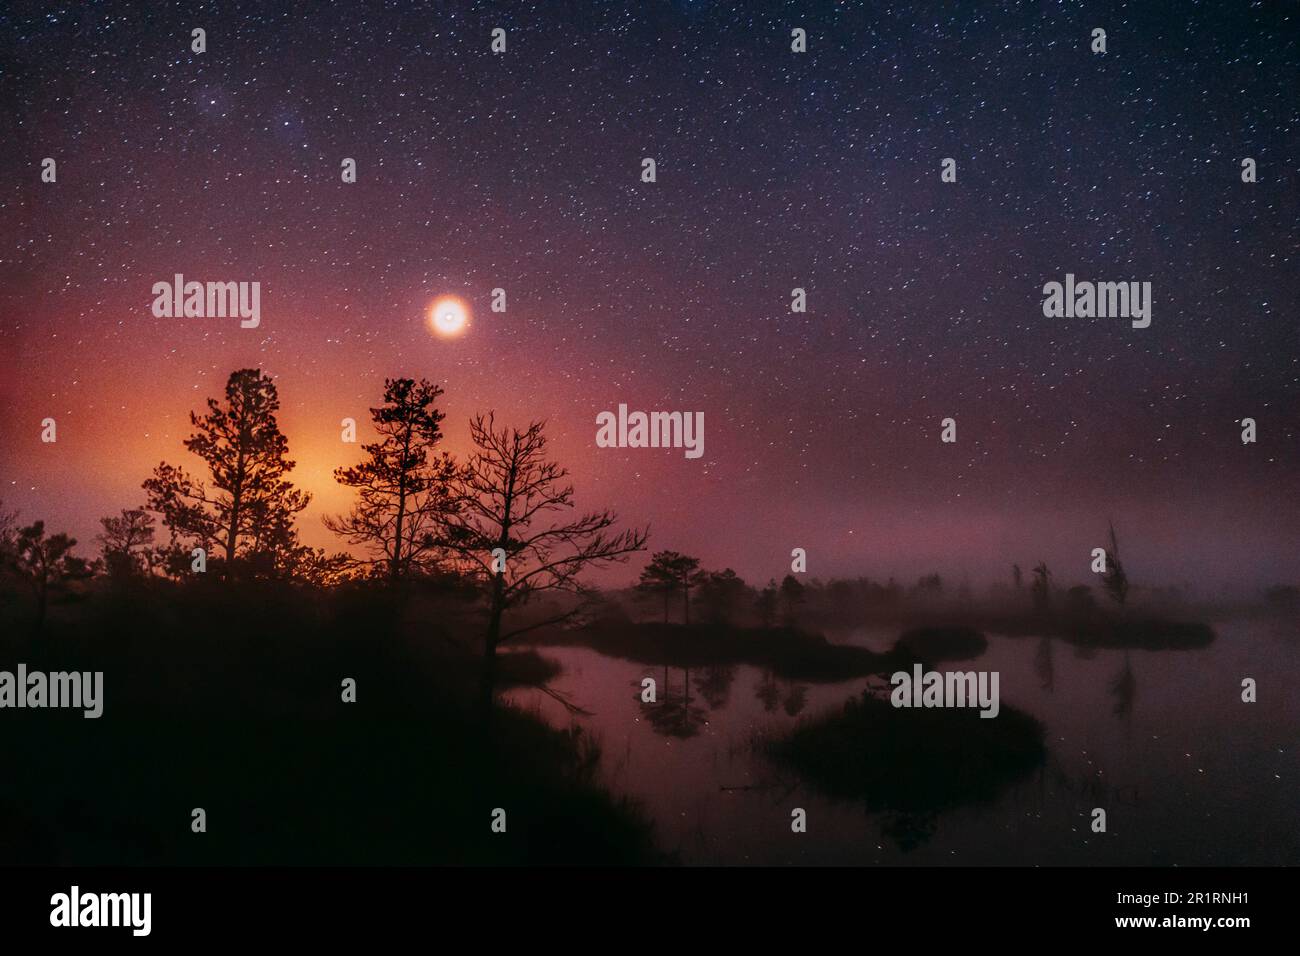 Dramatic Twilight Sky With Rising Planet Venus Over Swamp Landscape. Misty Morning Time. Soft Colors. Amazing Glowing Stars Effects Above Lonely Stock Photo